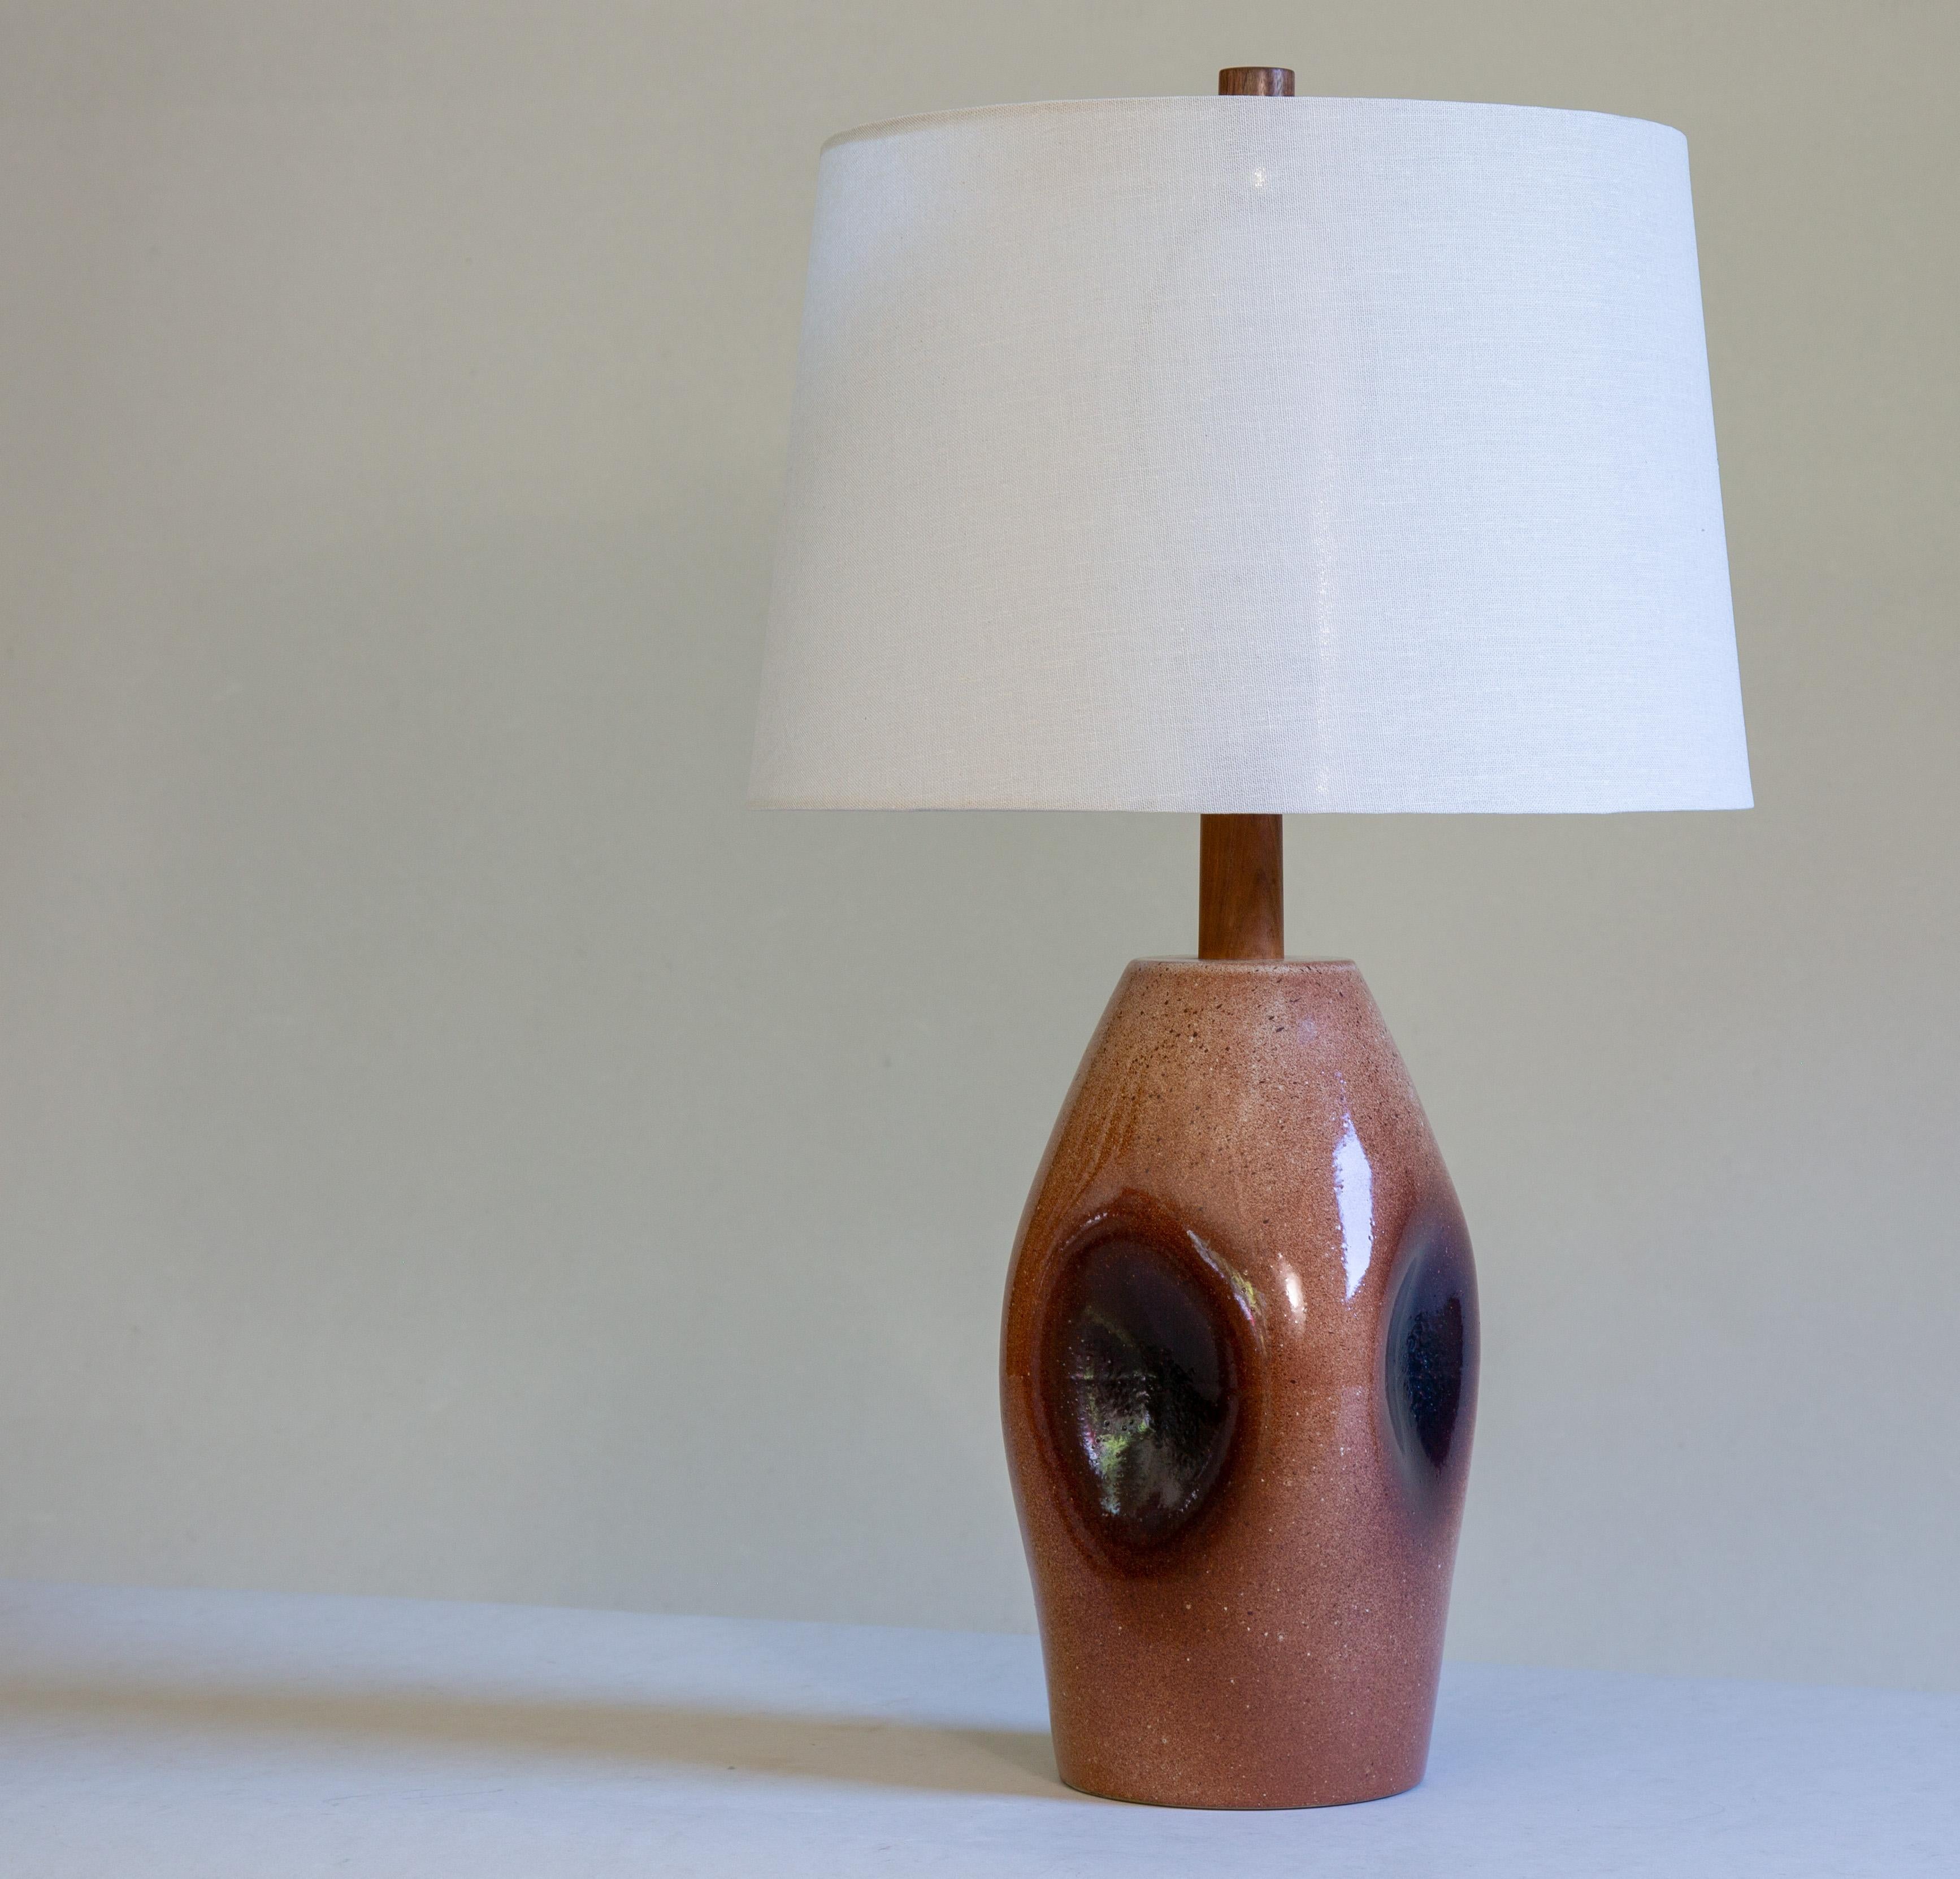 A highly collectable 1960s lamp designed by Jane and Gordon Martz of Marshall Studios in Veedersburg Indiana. These lamps are highly sought after and are showing up in designs all over the world. Blending sophistication and modern these lamps are